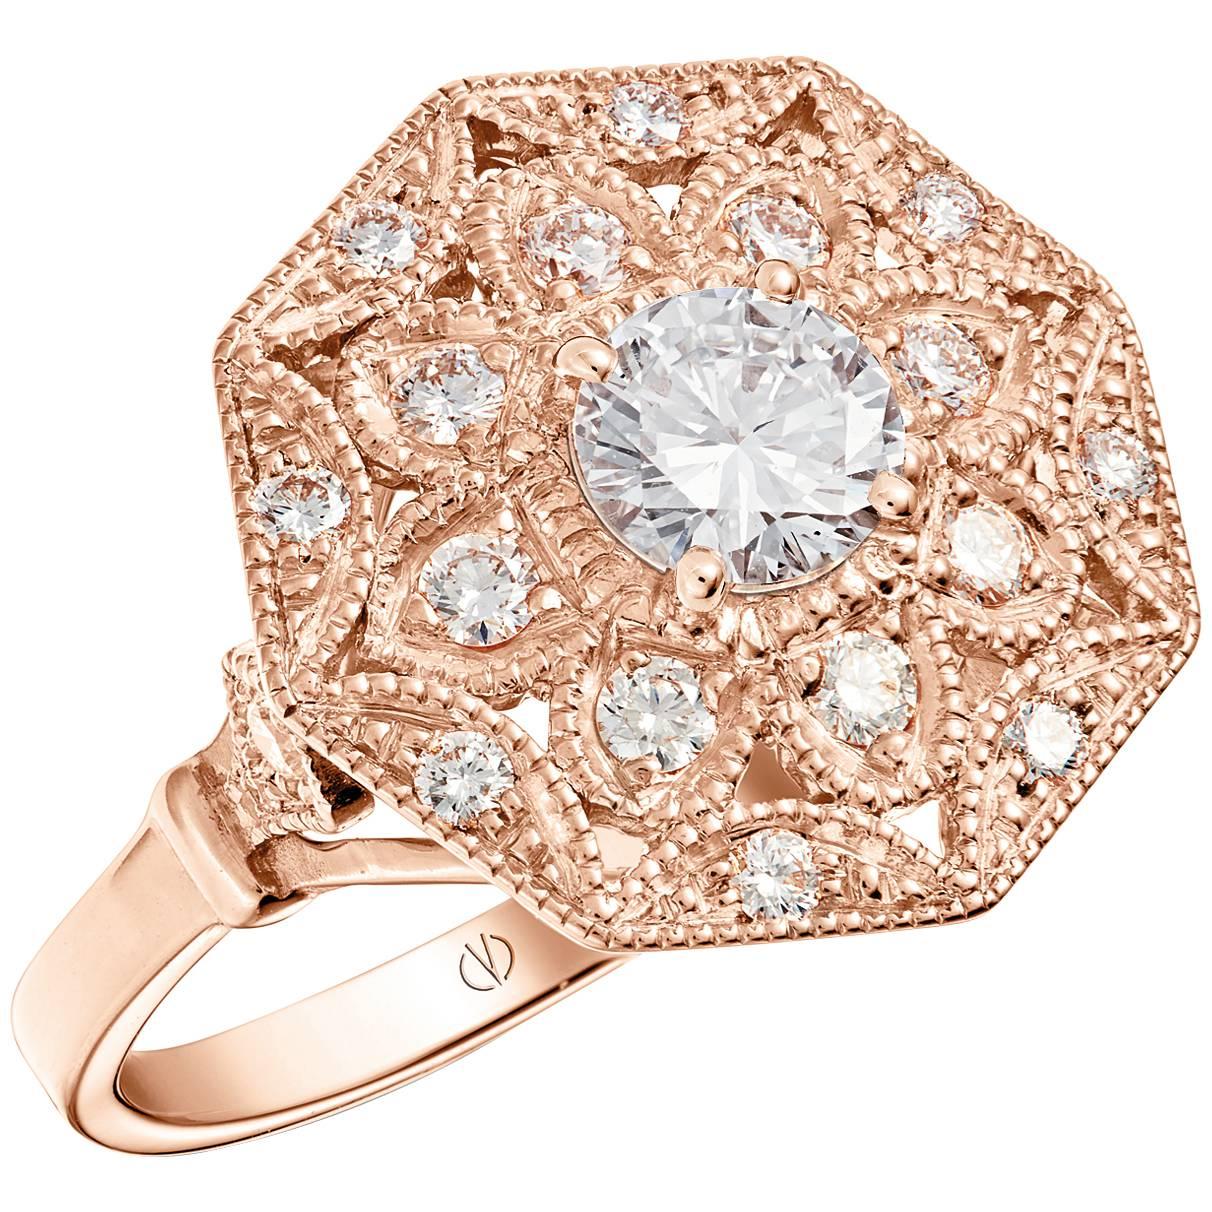 Mayanne  Art Déco style Rose Gold Diamond Ring Designed by Valerie Danenberg For Sale